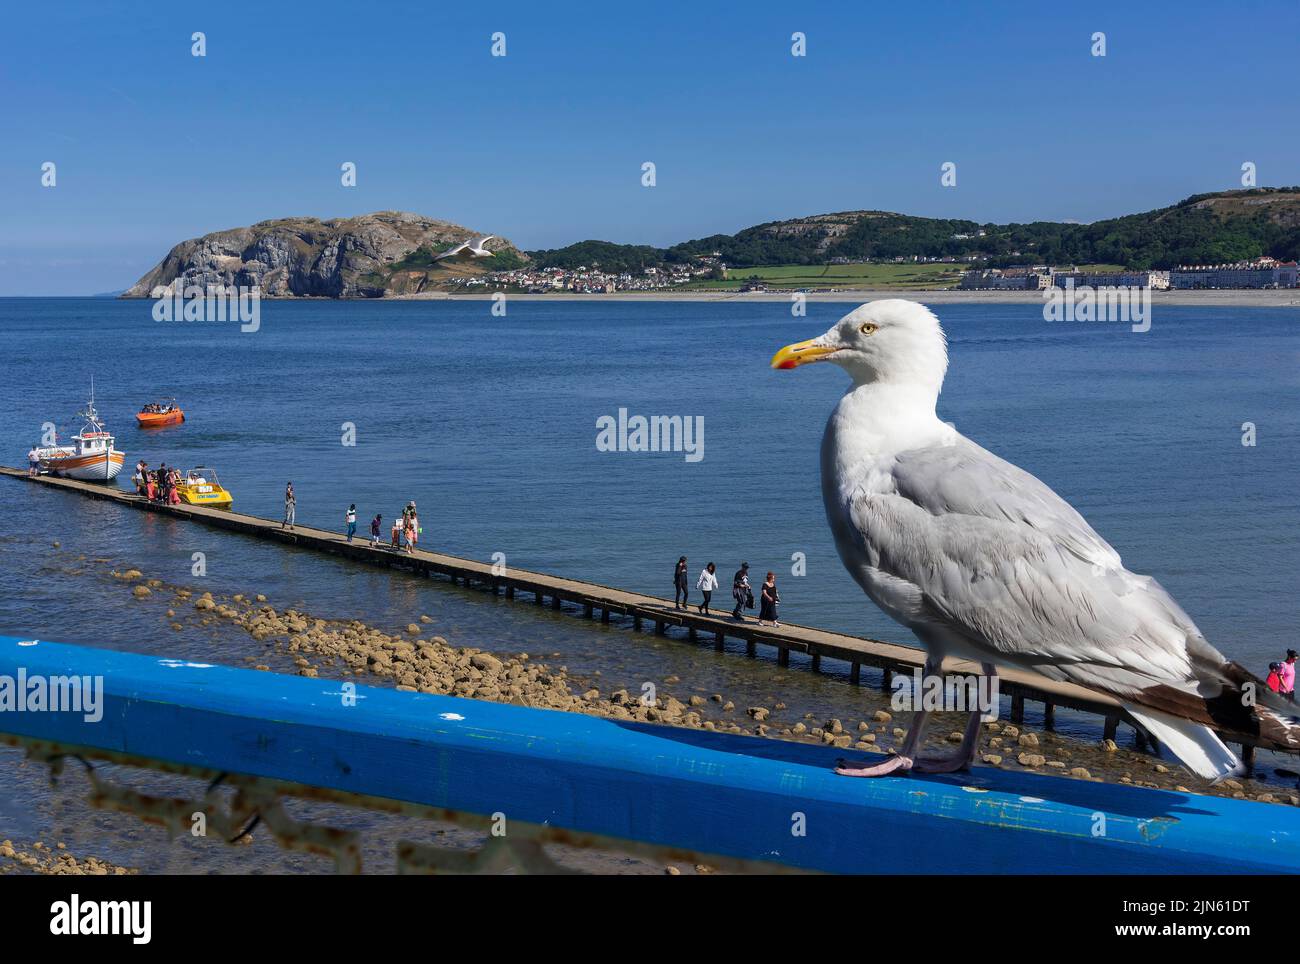 Day trippers go for a boat trip around the bay at Llandudno with the Little Orme in the backgound watched by a herring gull. Stock Photo